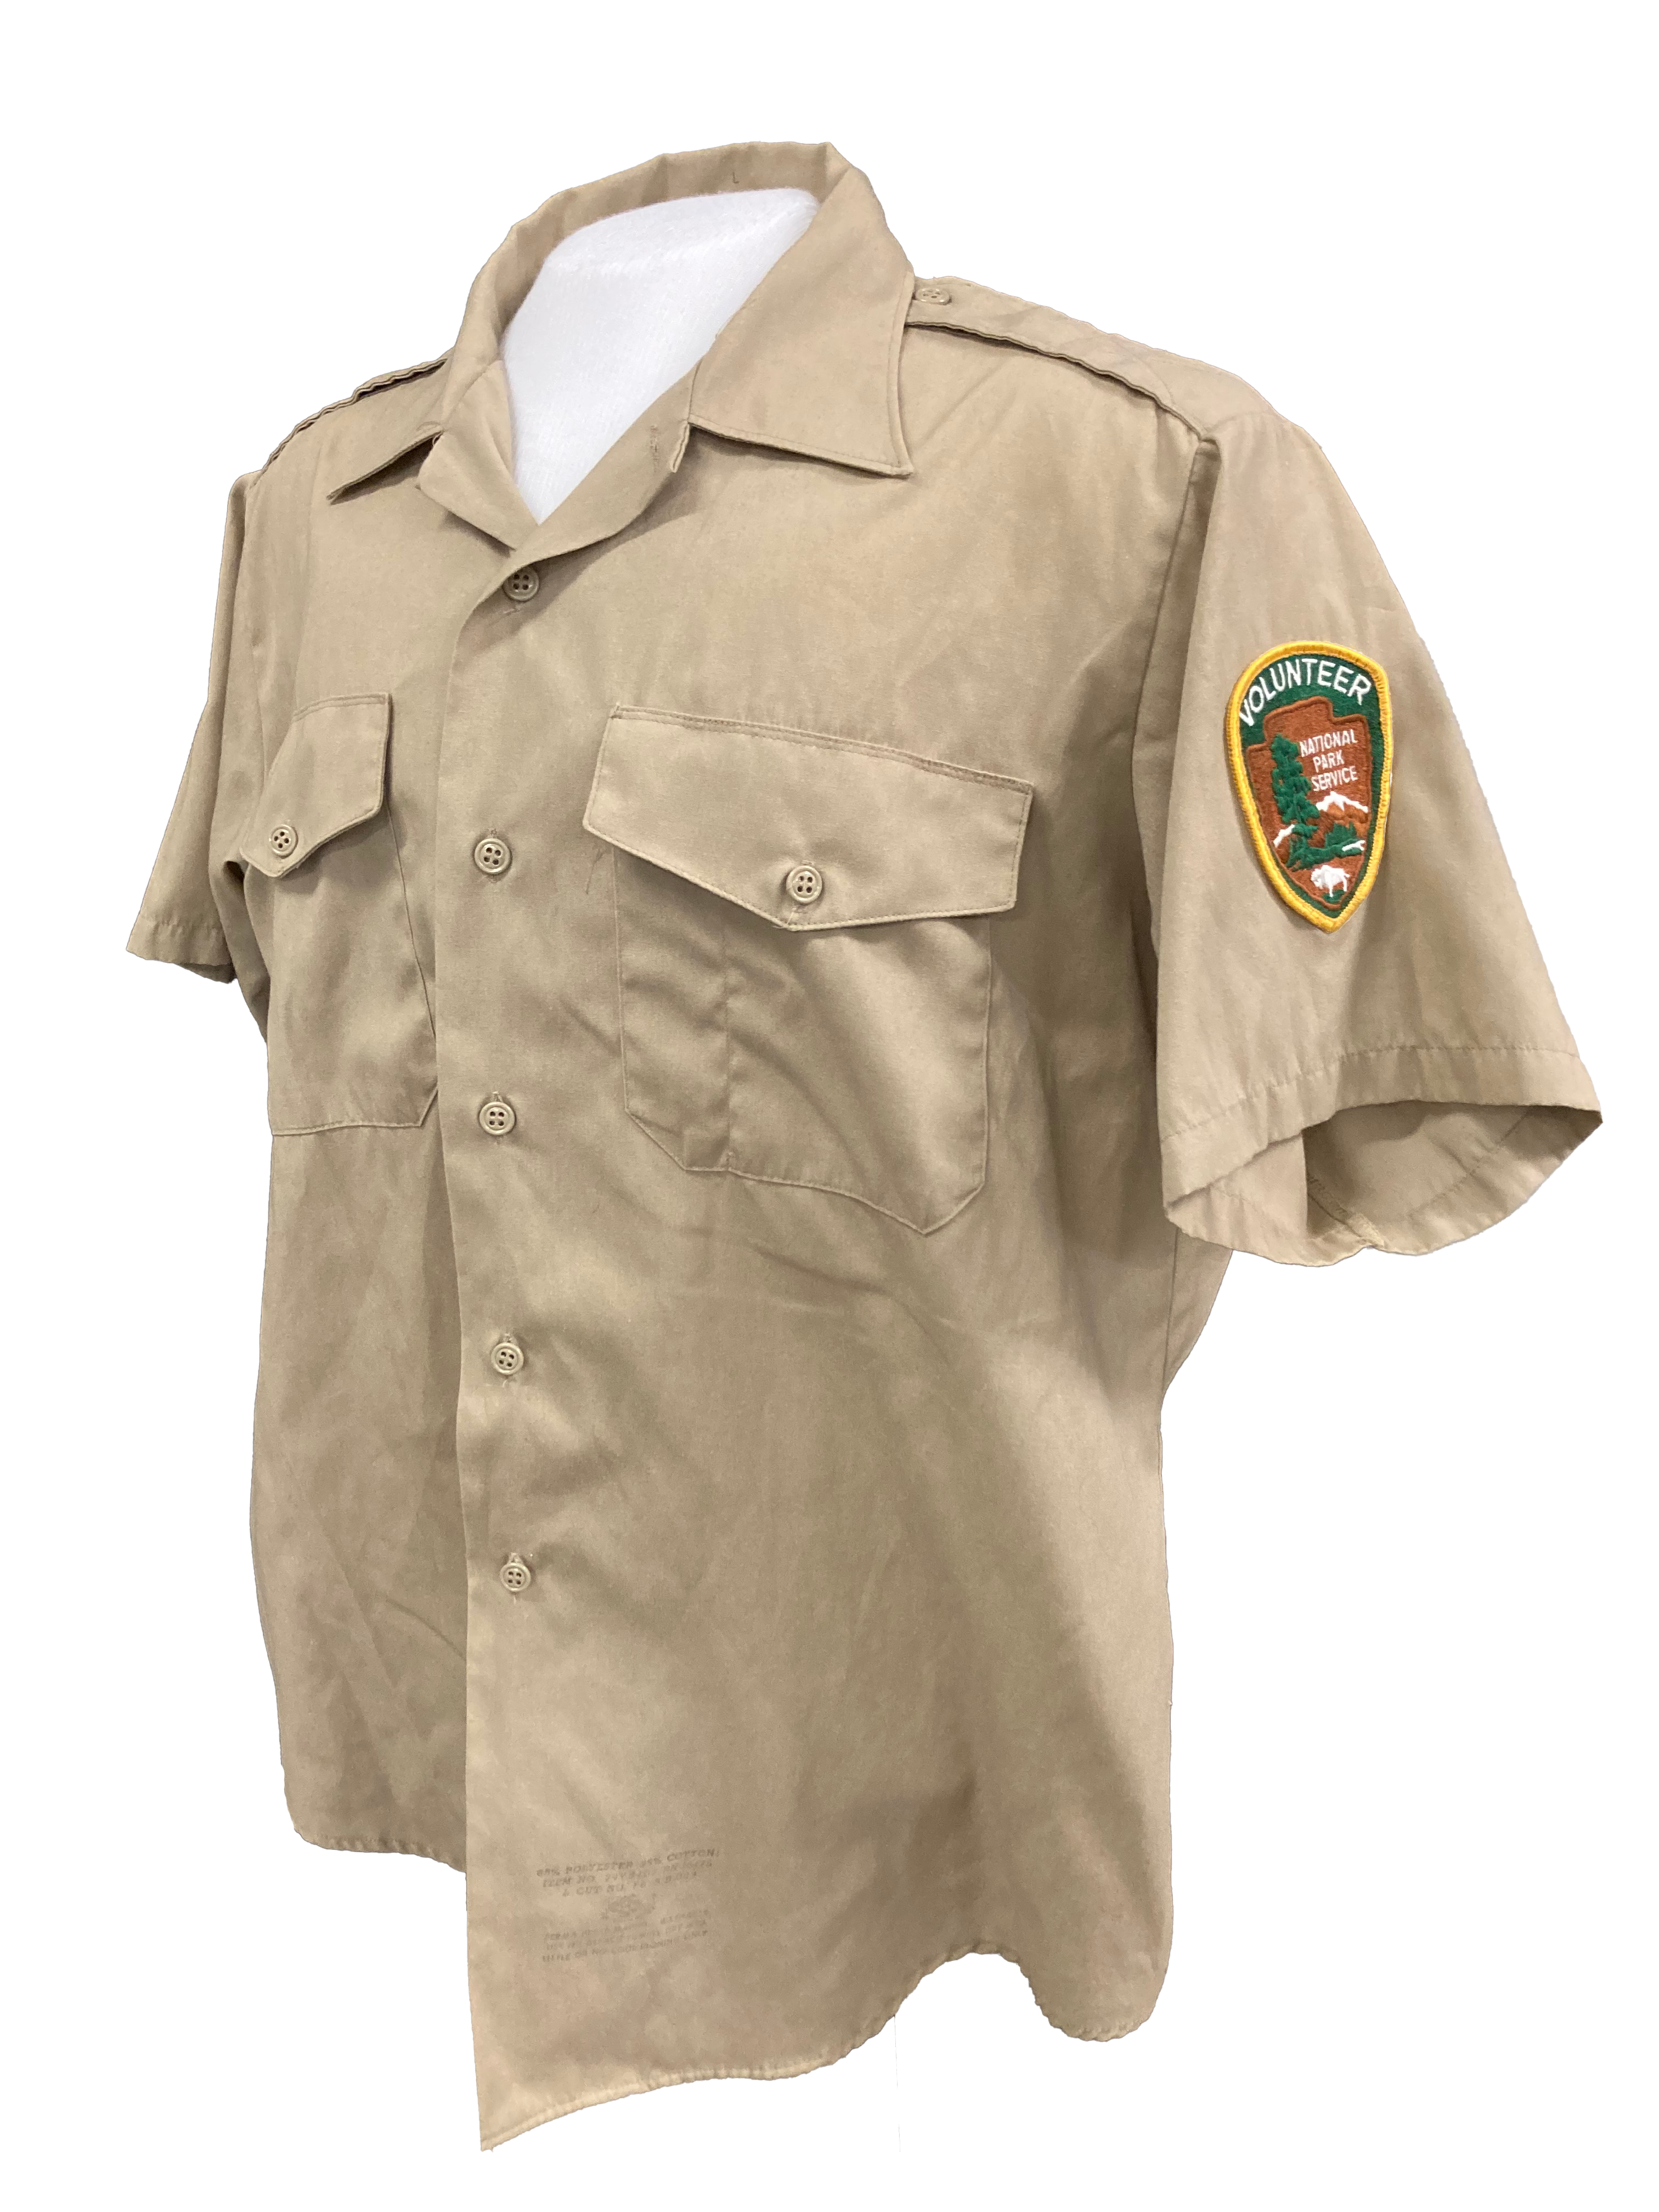 Khaki short sleeves shirt with volunteer patch